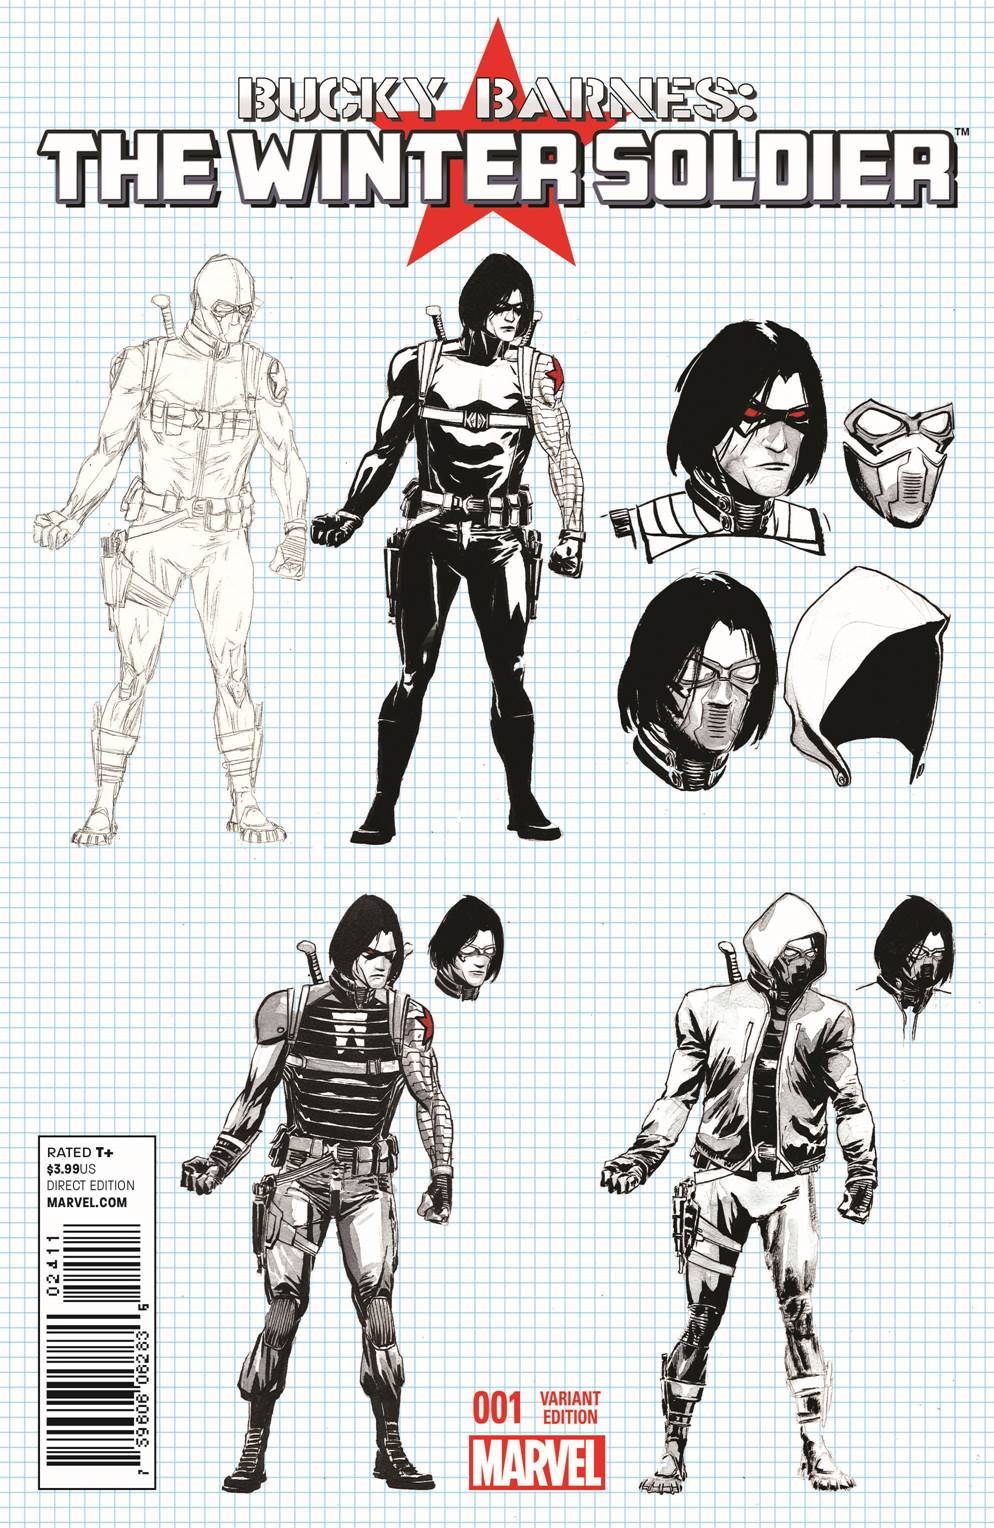 Bucky_Barnes_The_Winter_Soldier_1_Rudy_Design_Variant